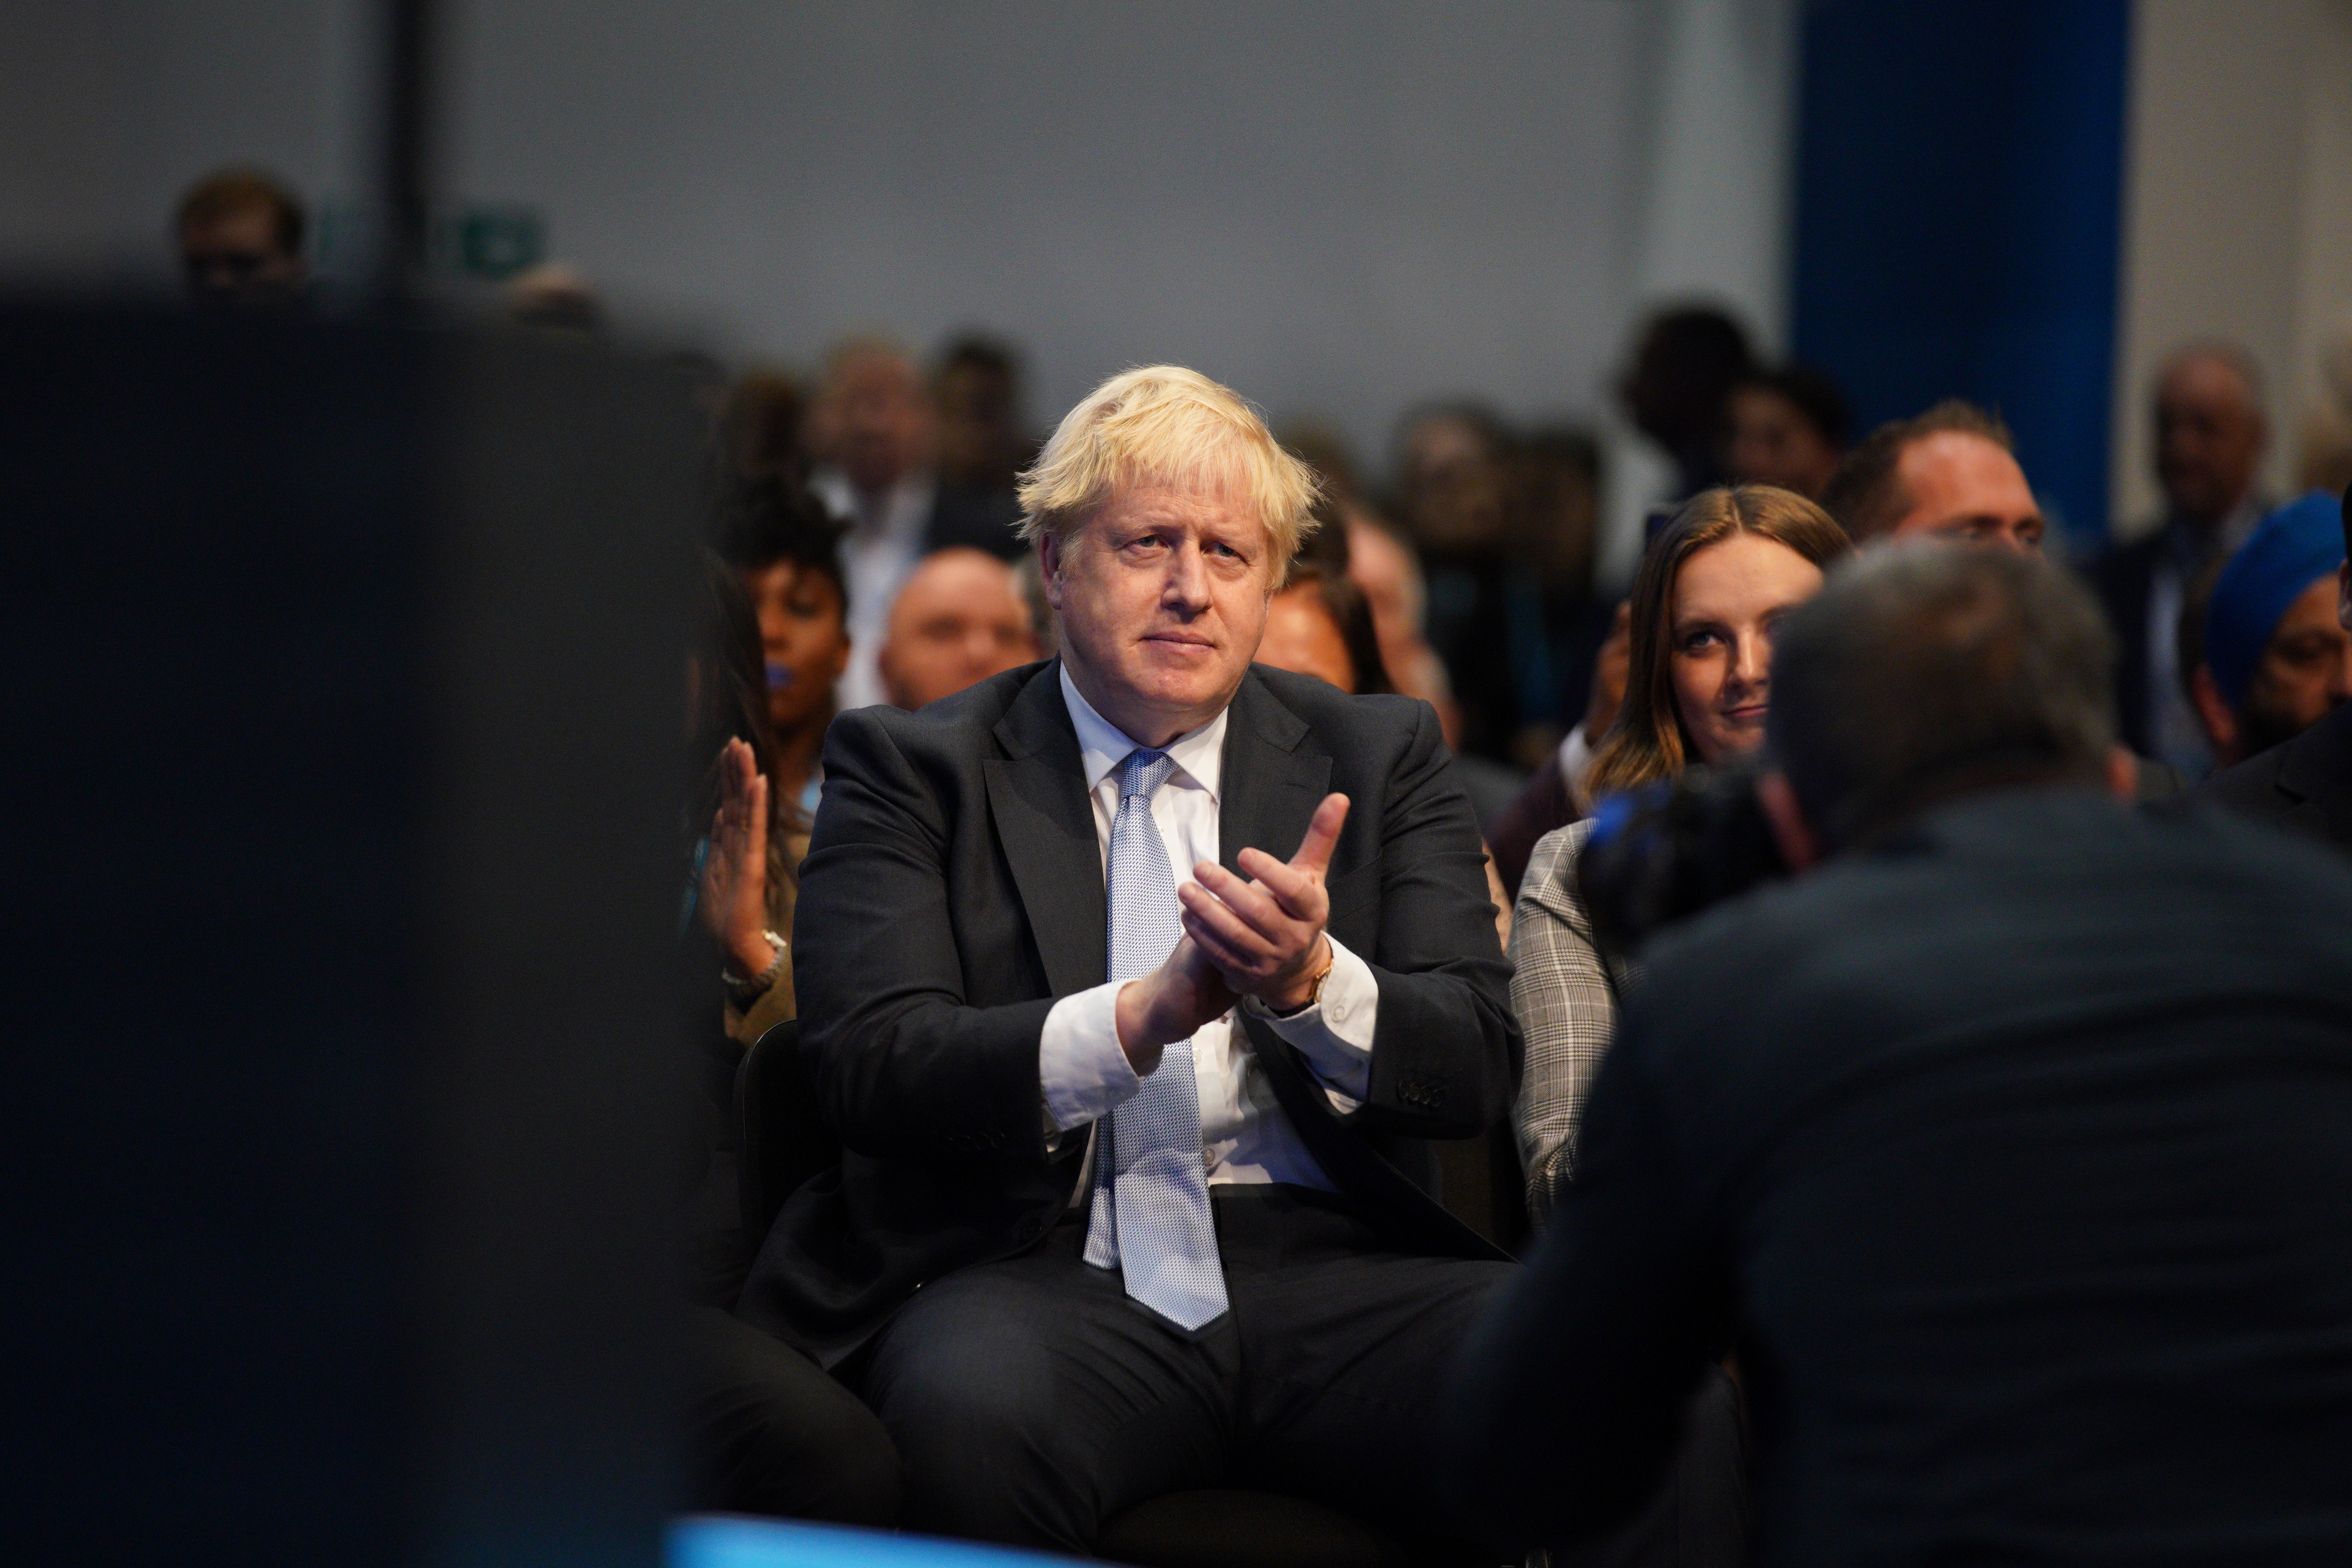 Boris Johson at the Conservative party conference earlier this week.